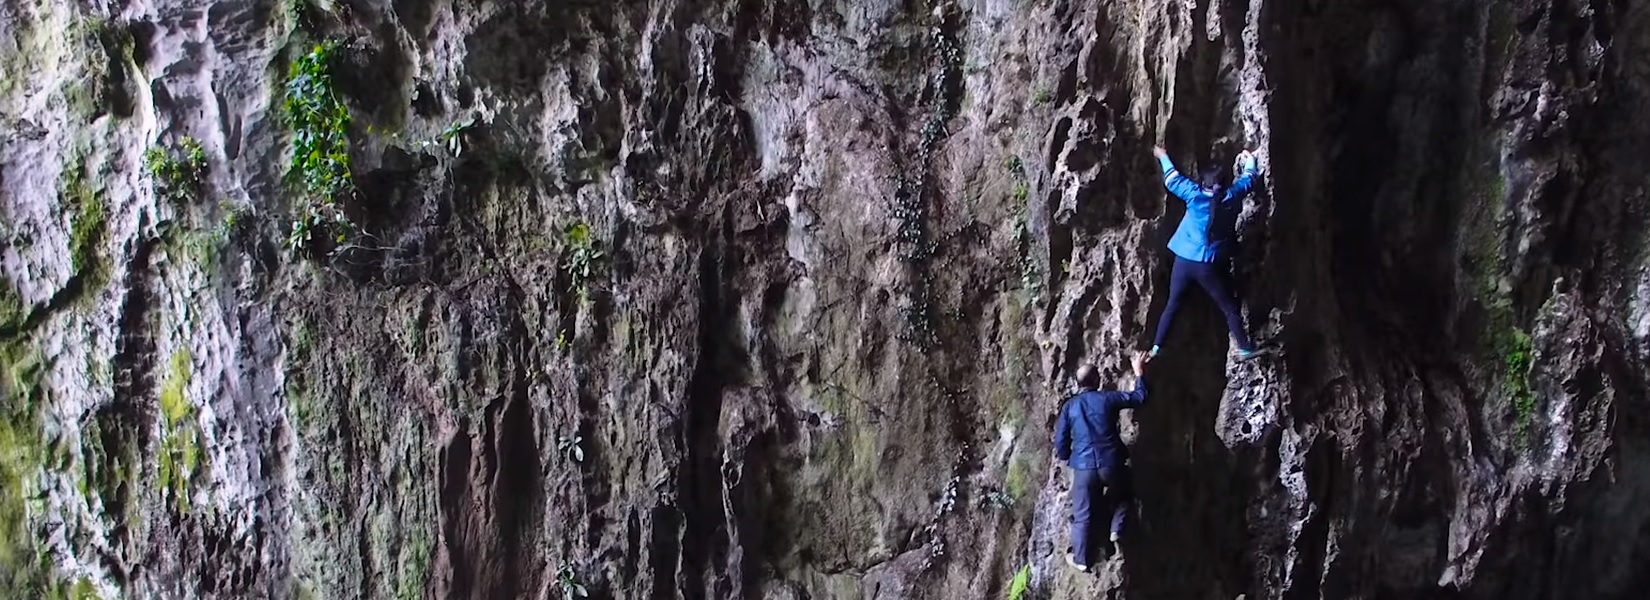 The Spider Climbers Of China